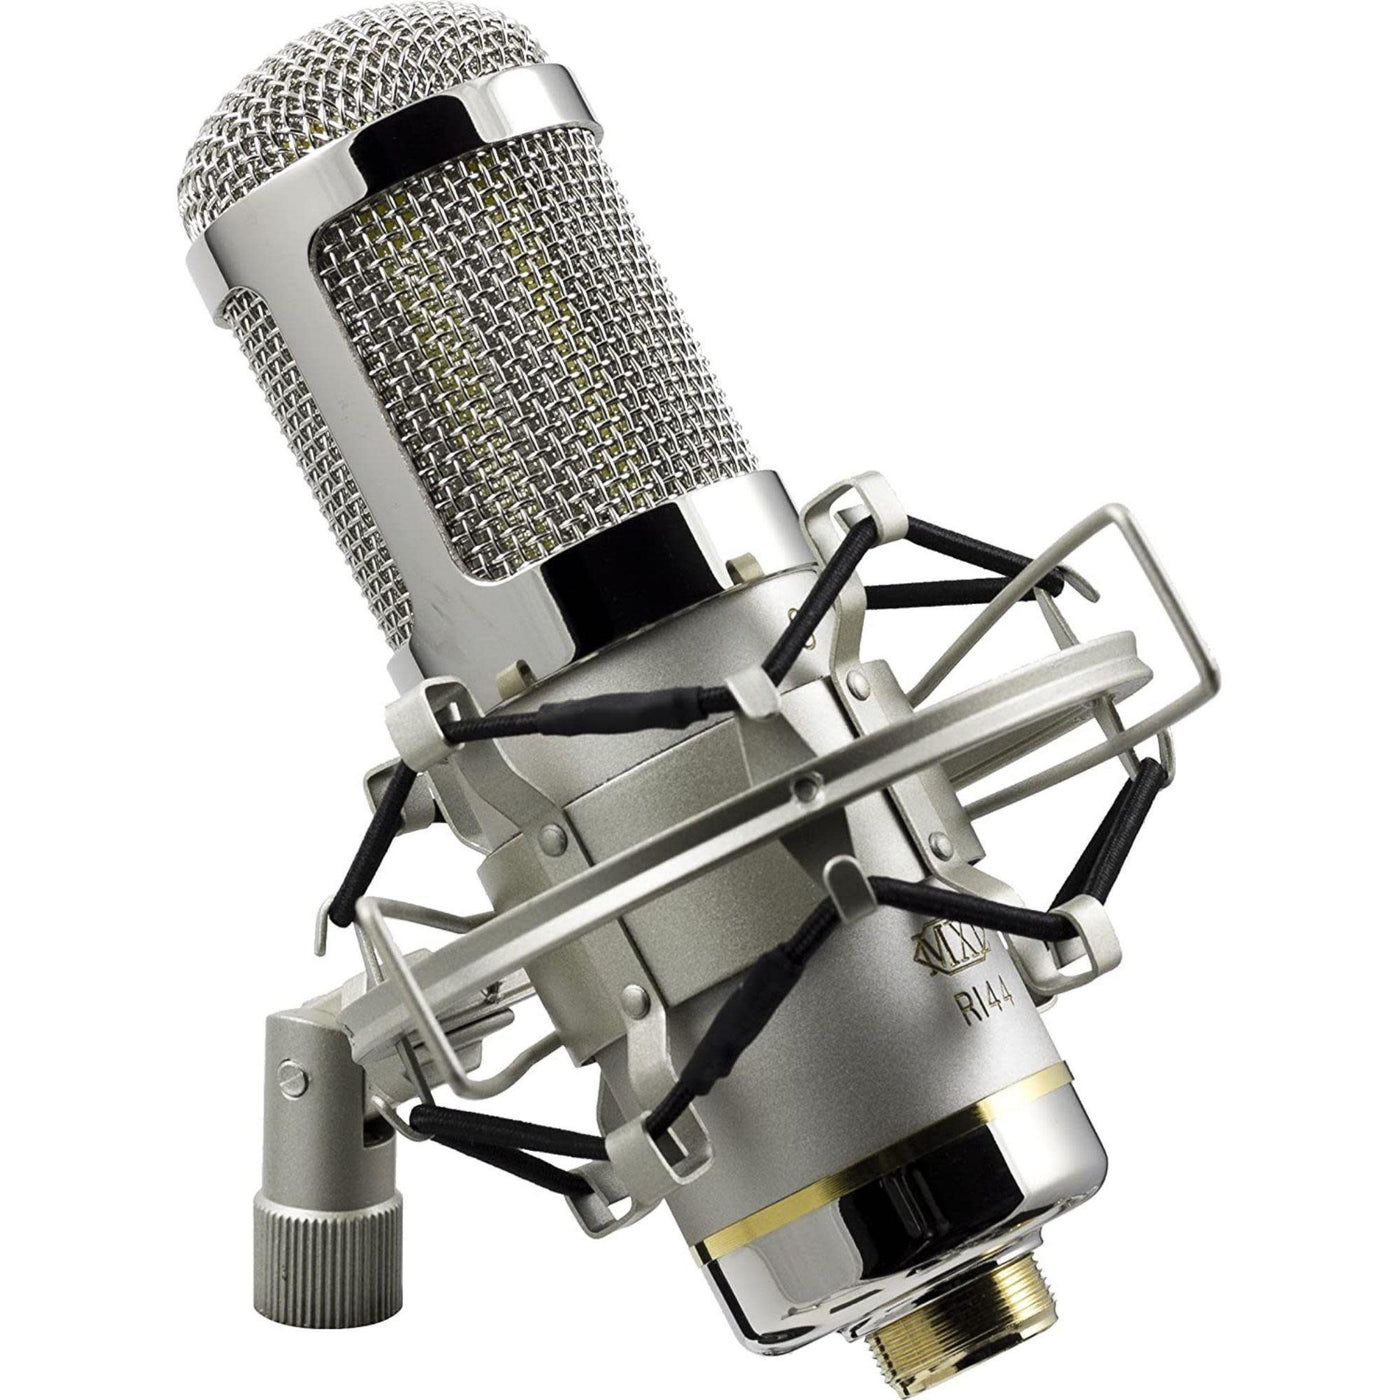 MXL R144 HE Heritage Edition Ribbon Microphone